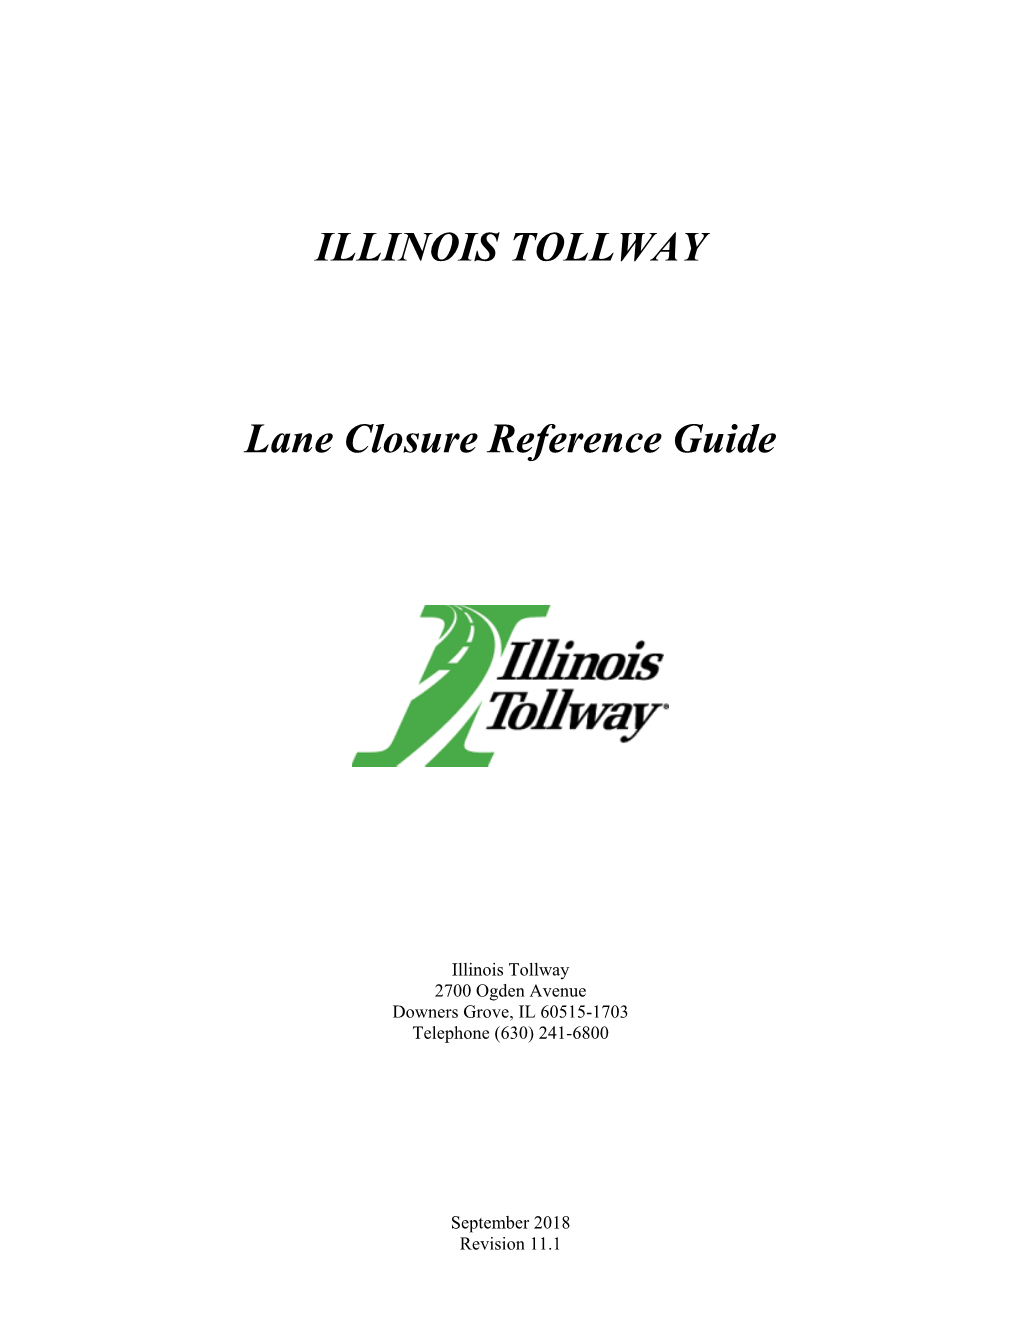 ILLINOIS TOLLWAY Lane Closure Reference Guide